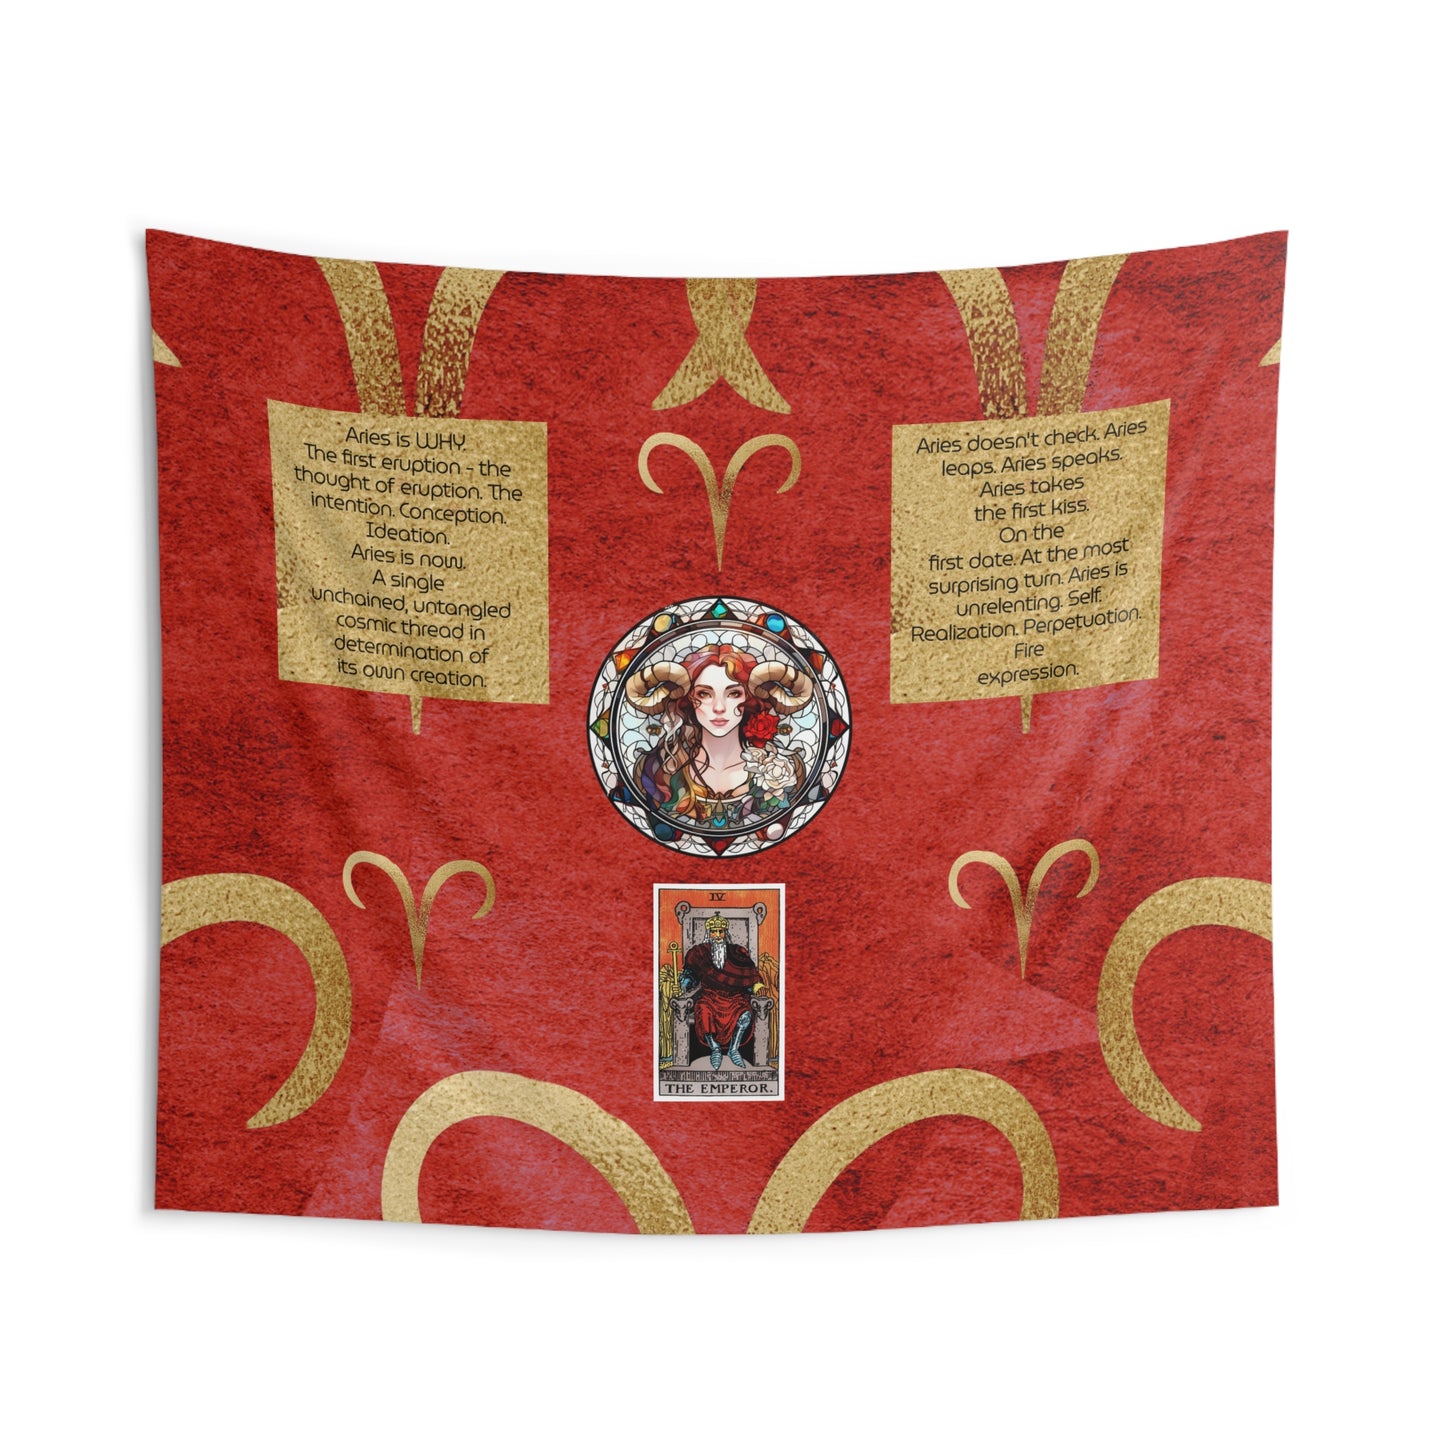 Aries Zodiac Sign Altar Cloth or Wall Tapestry With Stained Glass Illustration, The Emperor Tarot Card and a Poem